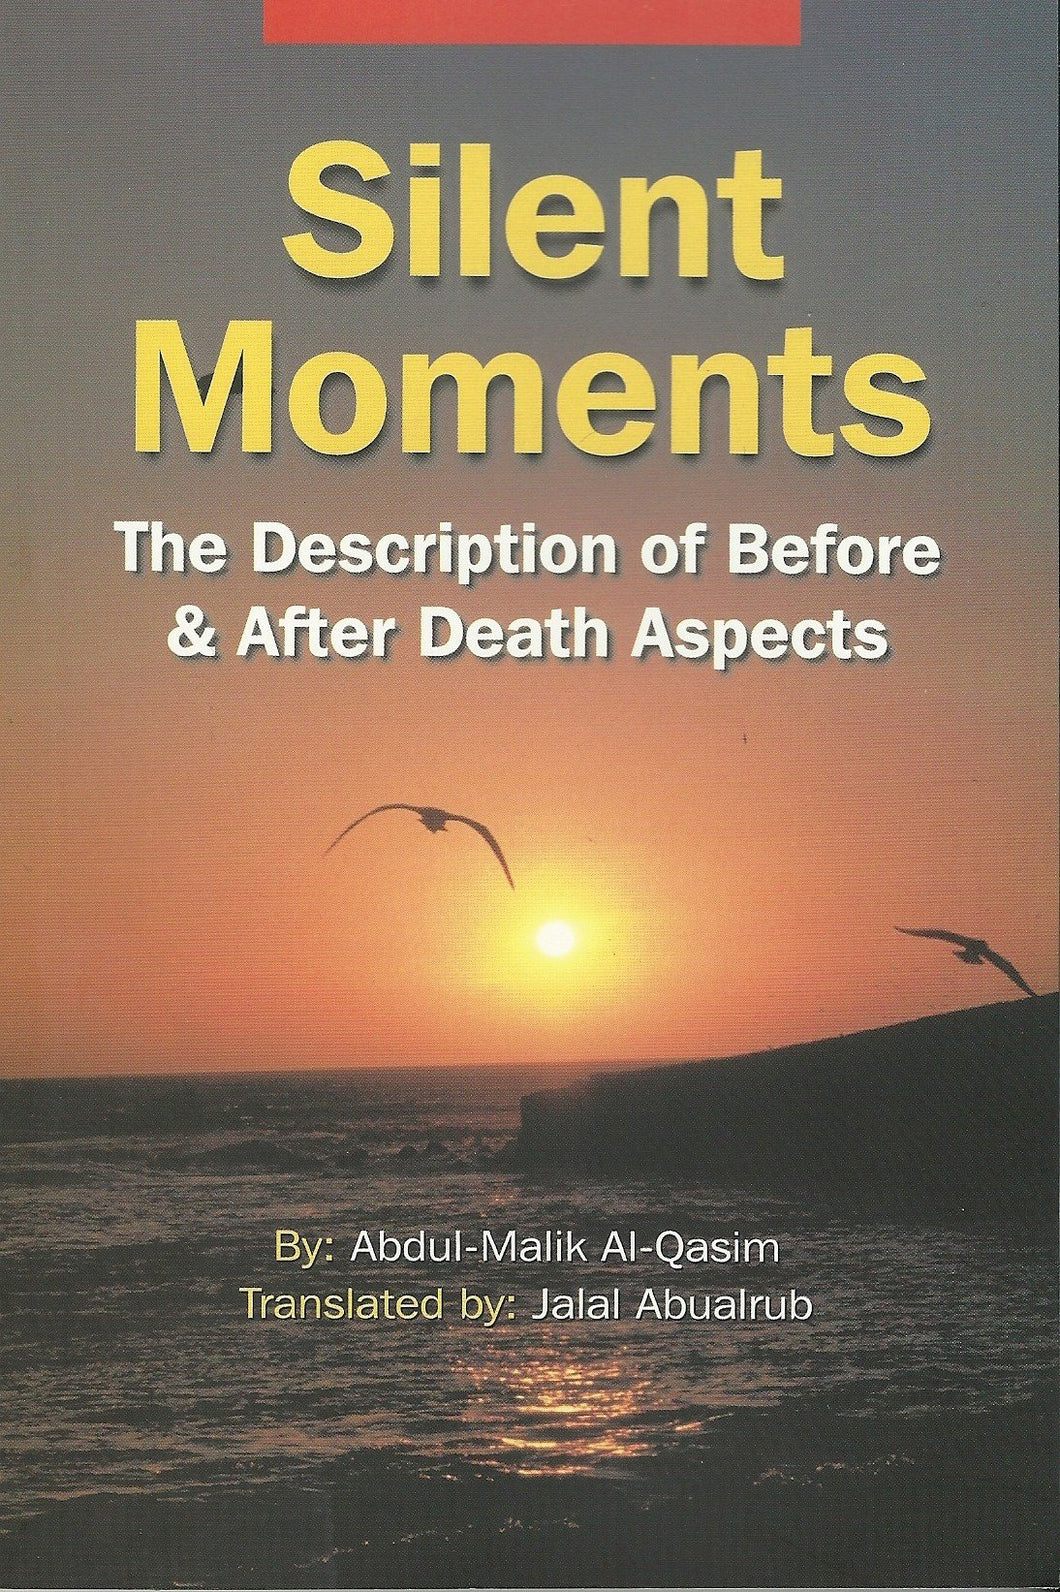 Silent Moments The Description of Before & After Death Aspects By Abdul-Malik Al-Qasim